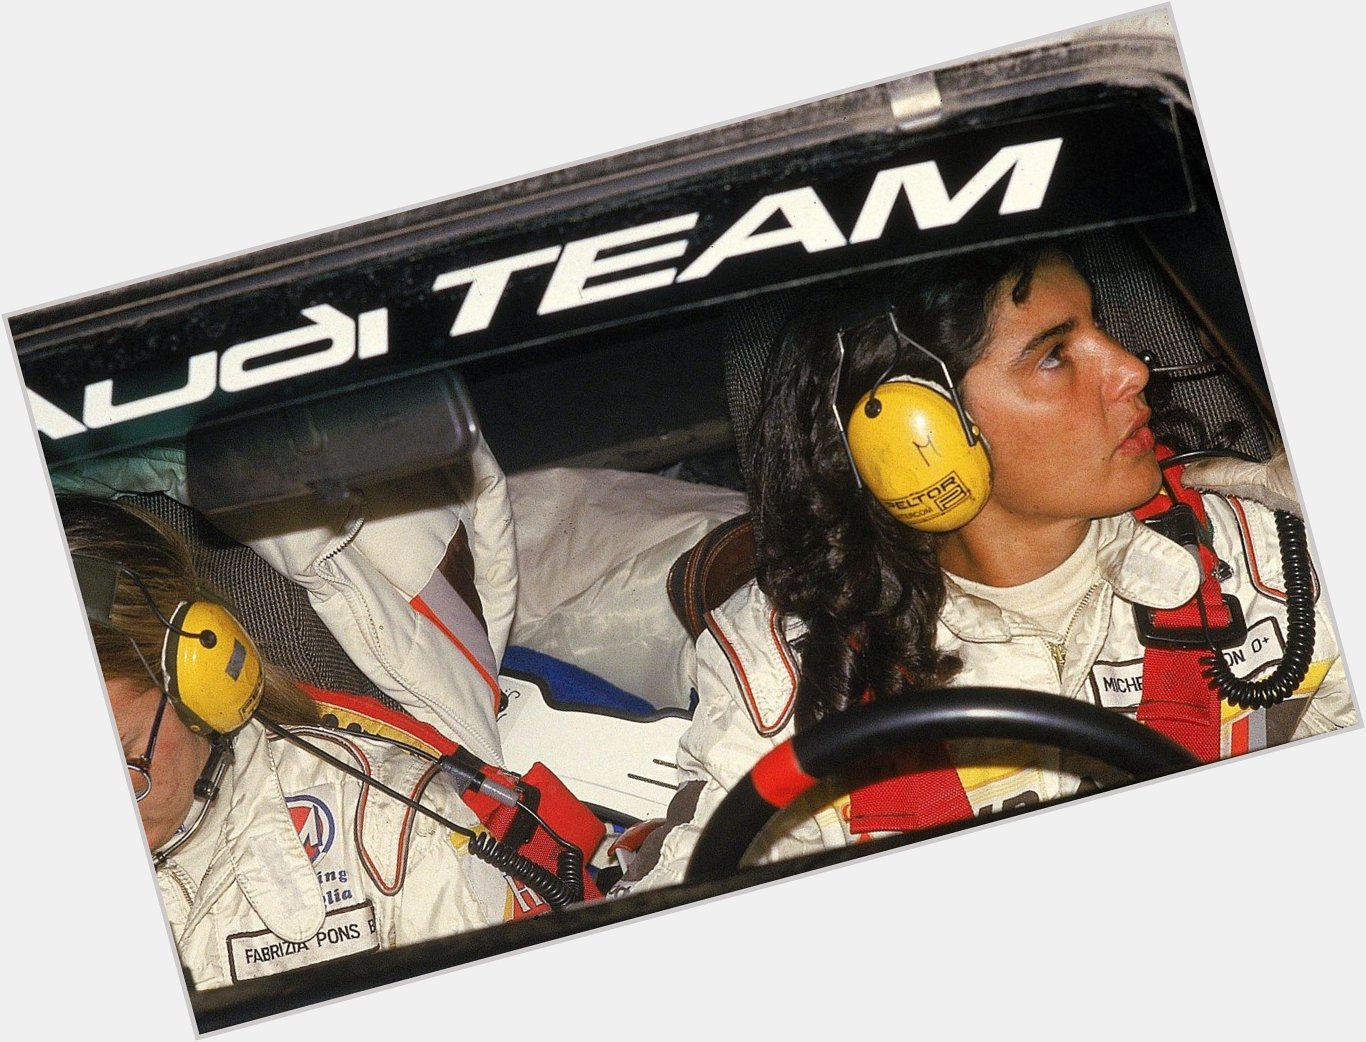 Happy 68th Birthday to French Rally driver Michèle Mouton, the first female to win a World Rally Championship event. 